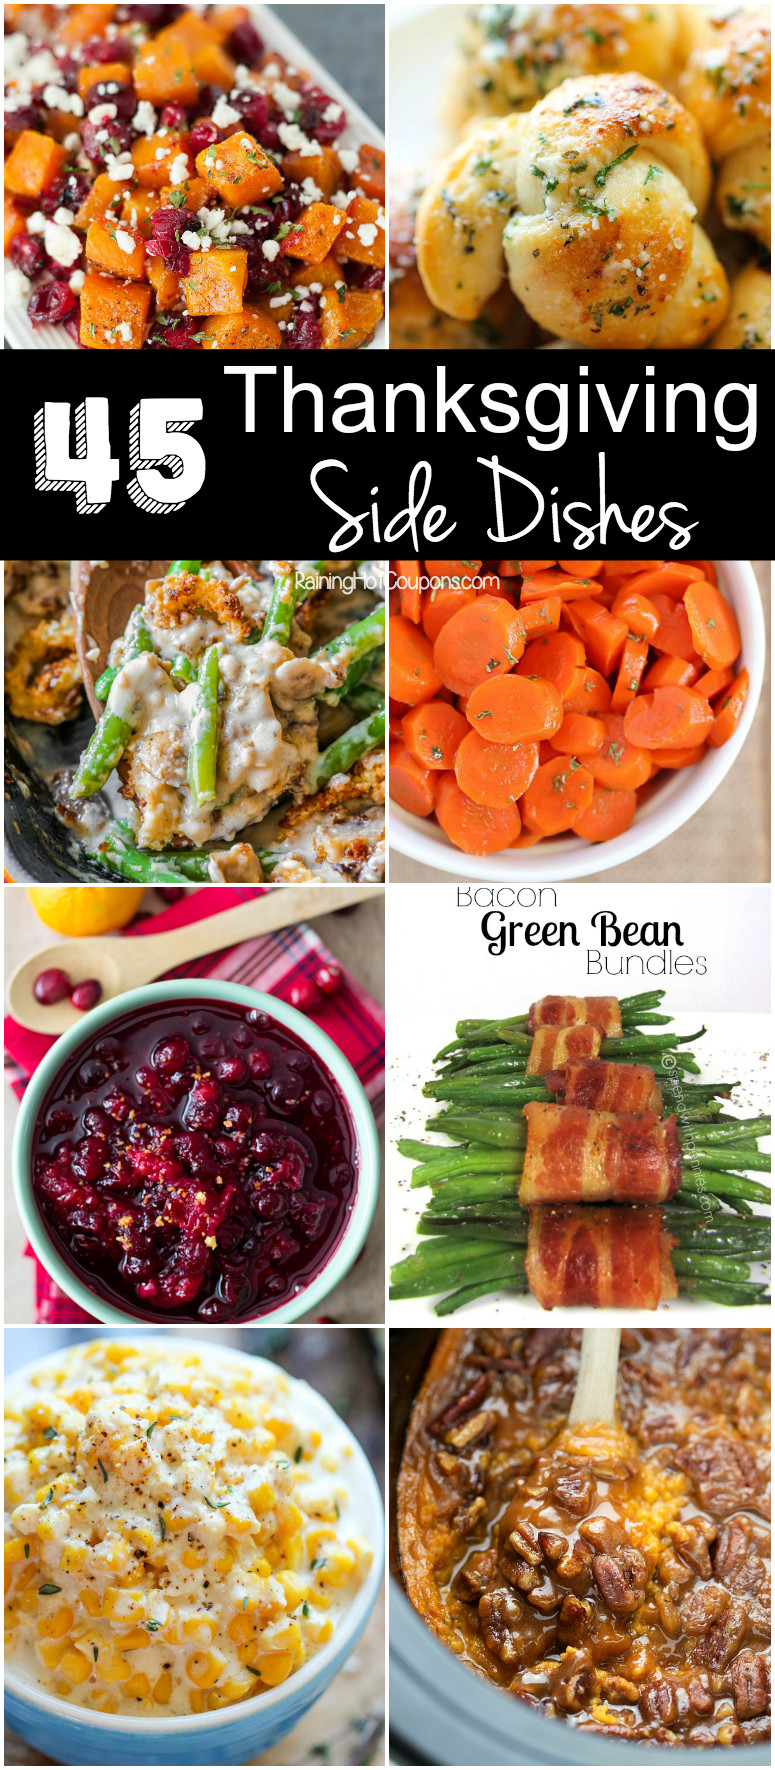 Thanksgiving Dinner Side Dishes
 45 Thanksgiving Side Dishes